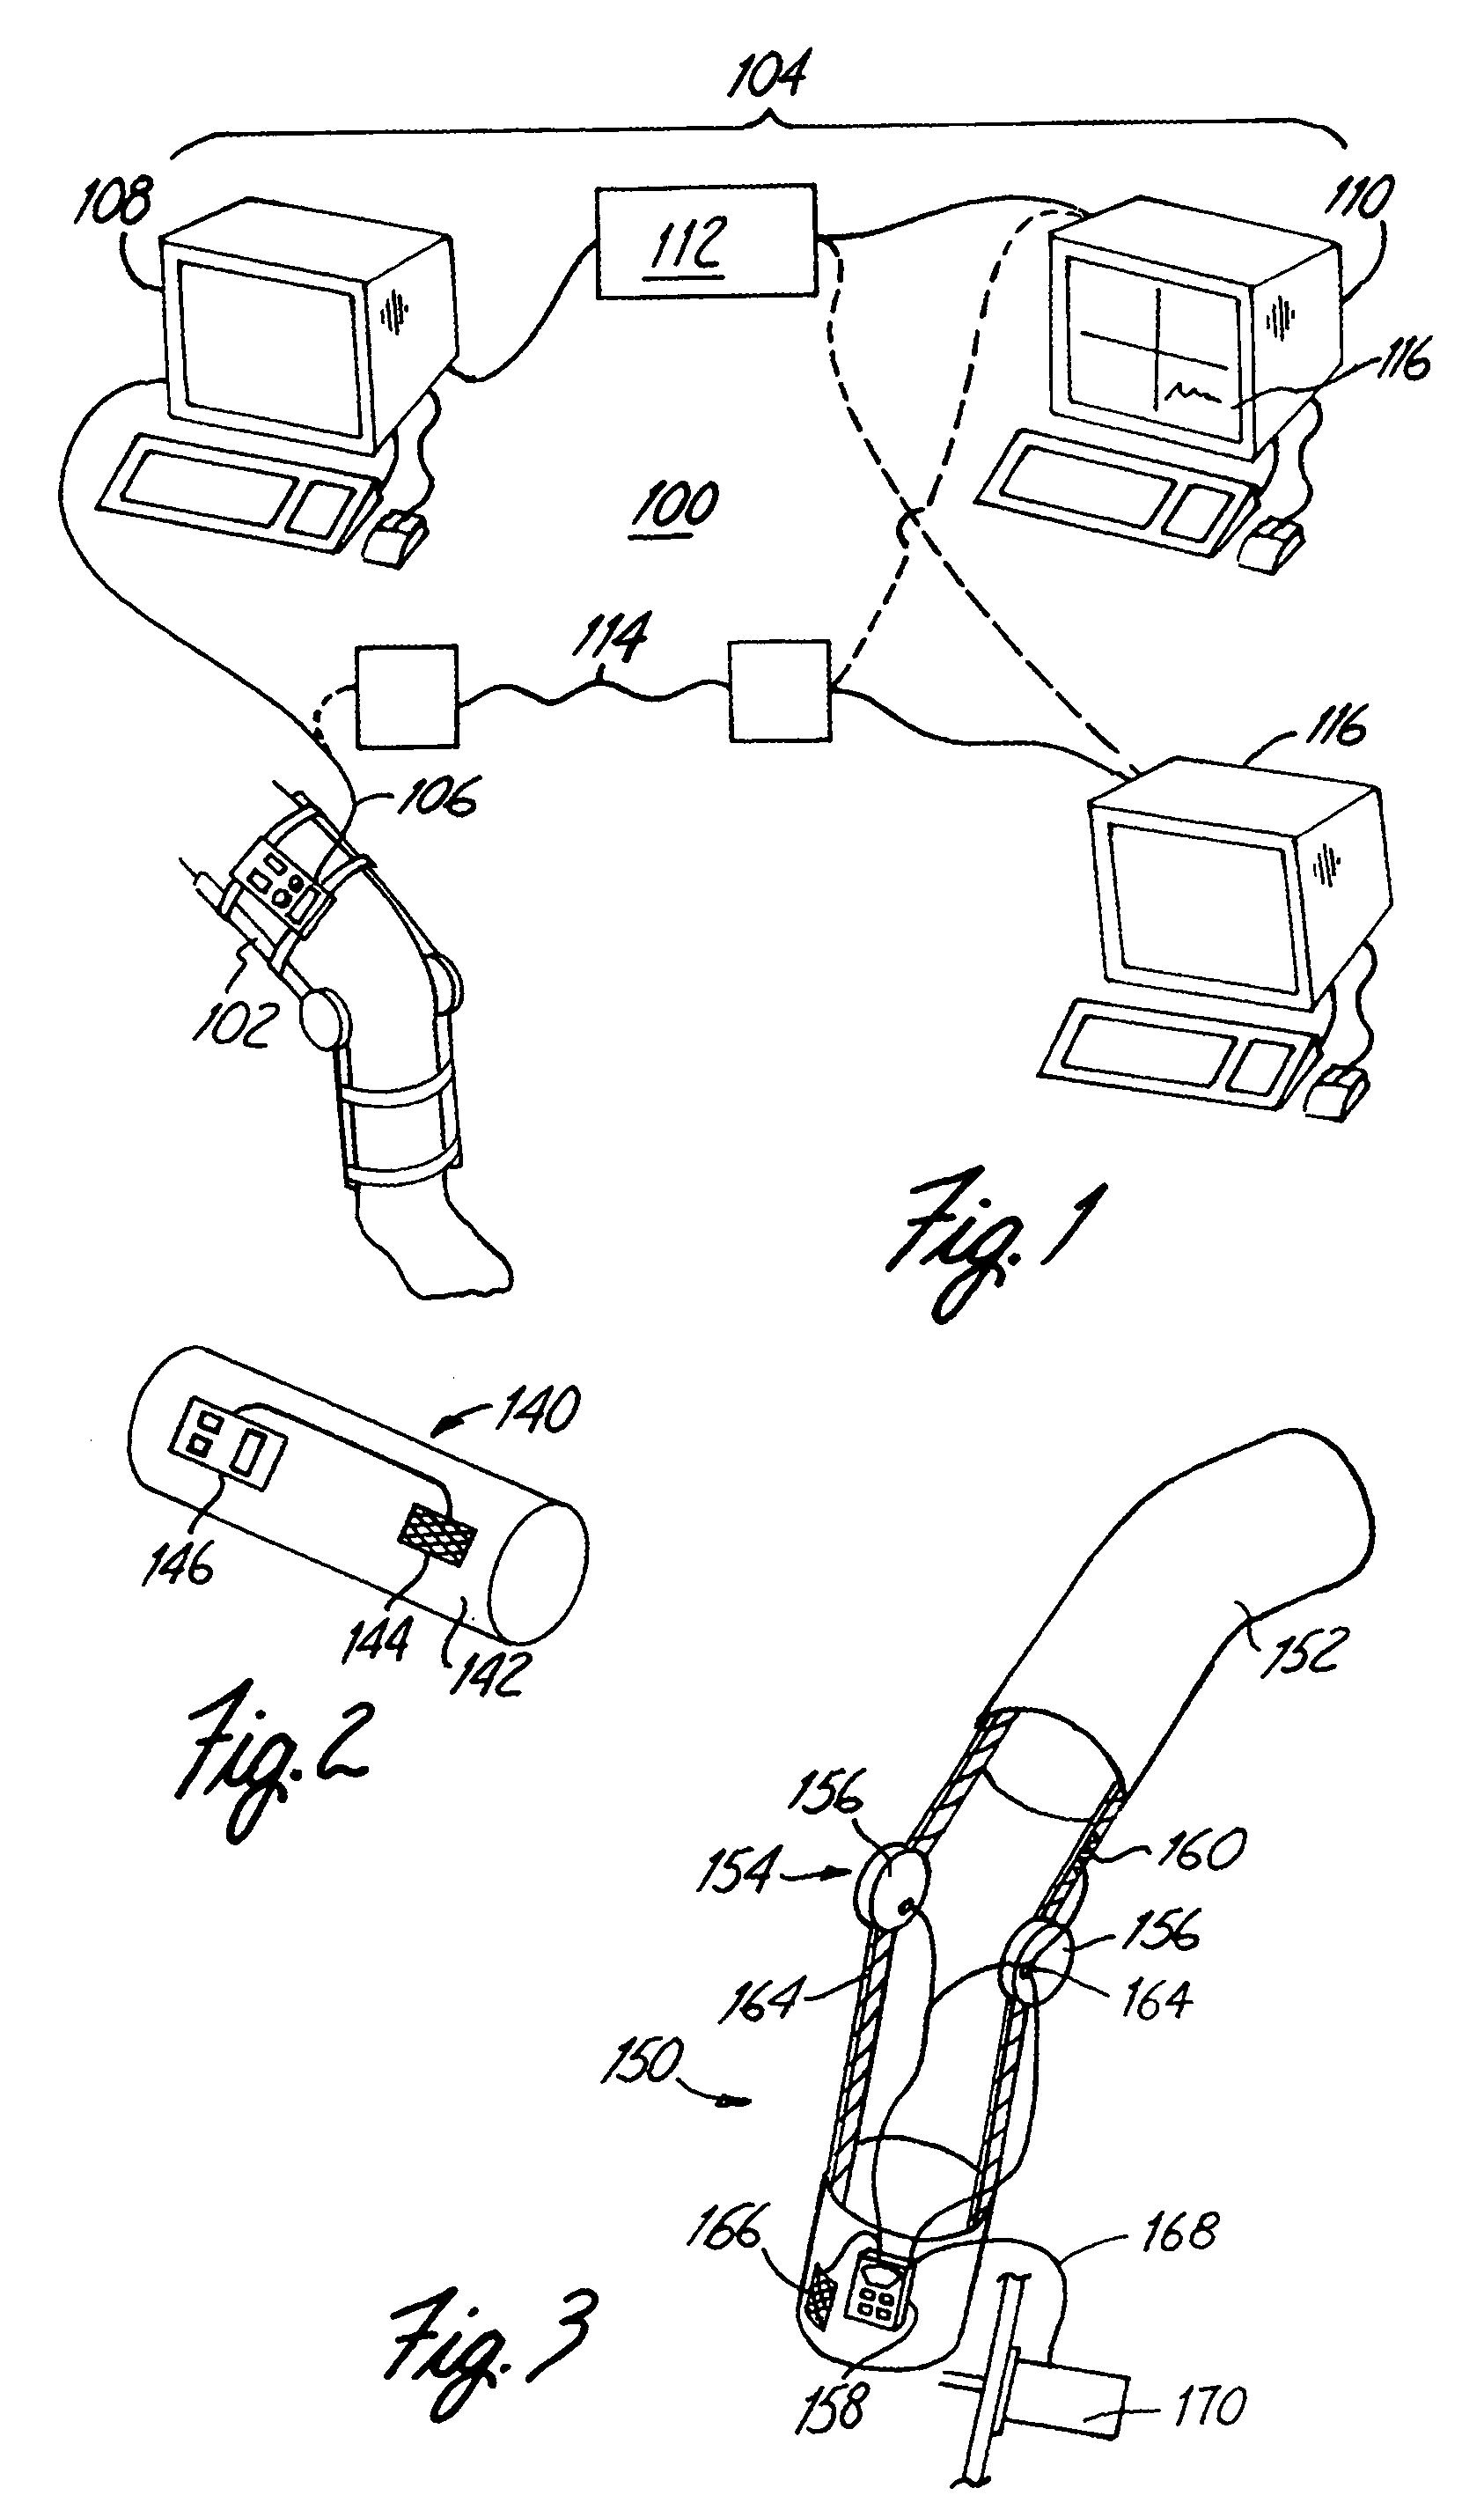 Remote monitoring of an instrumented orthosis